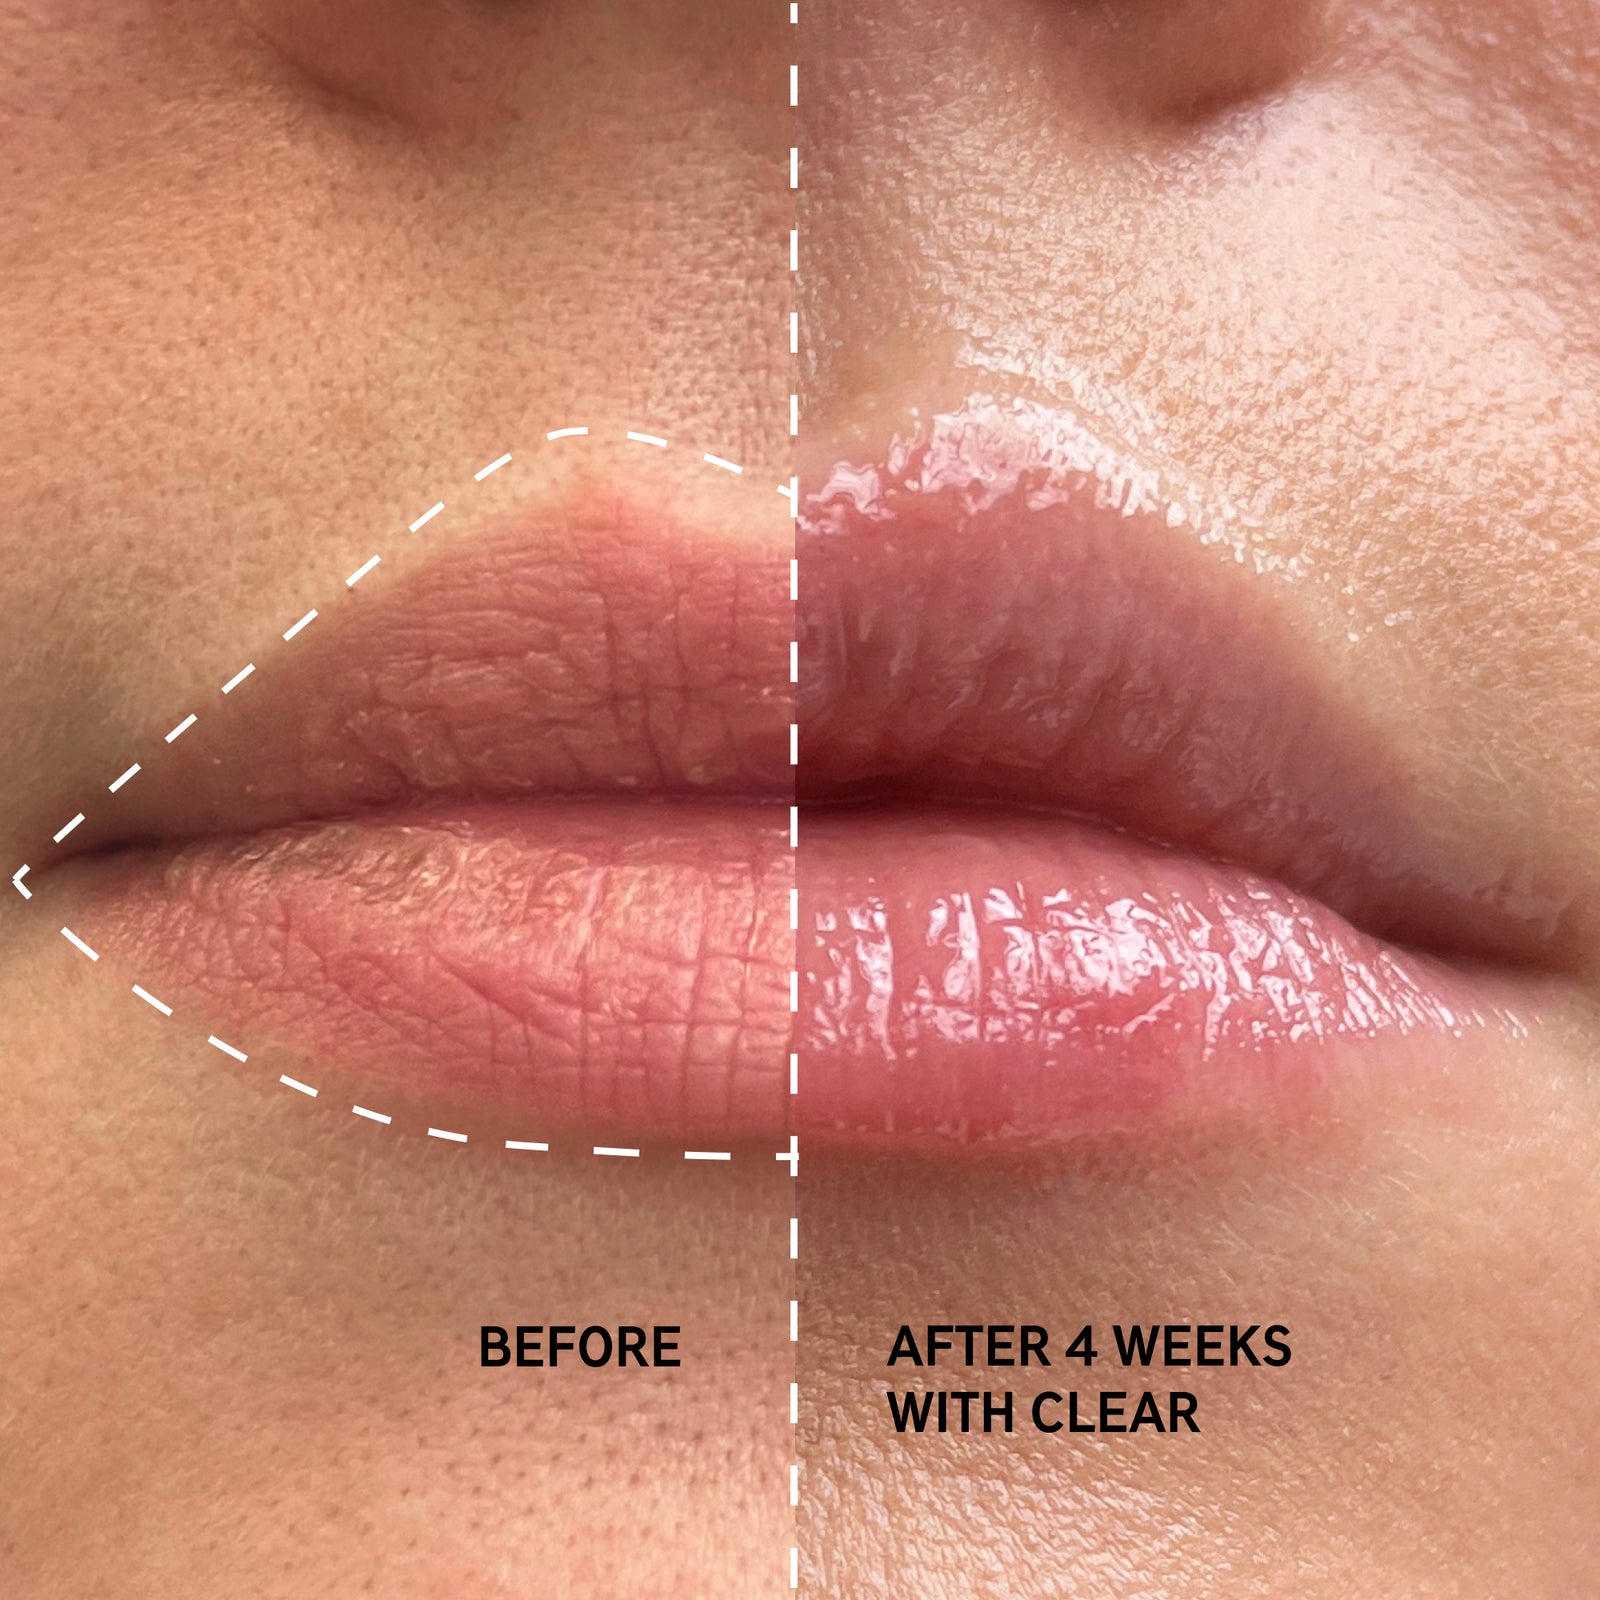 Before and after using Clear Tripeptide Lip Balm after 4 weeks showing increased volume and hydration